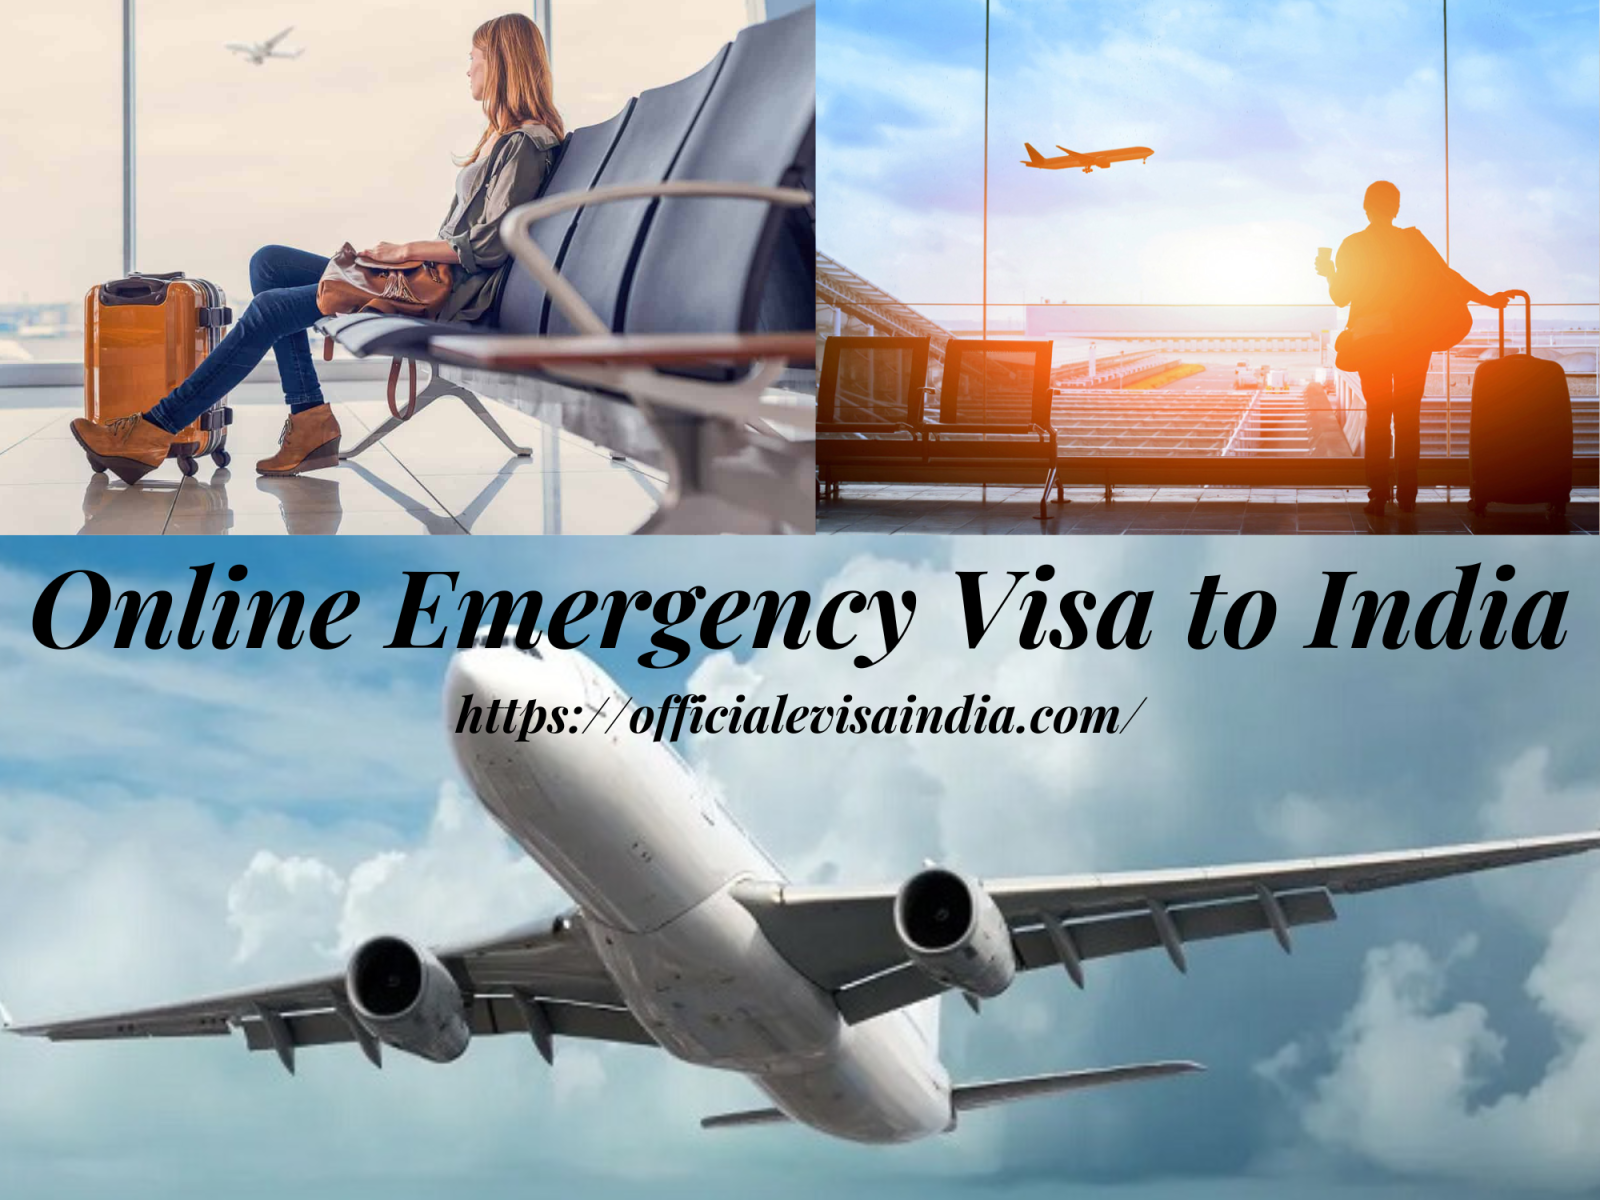 online-emergency-visa-to-india-by-indiaevisa-on-dribbble